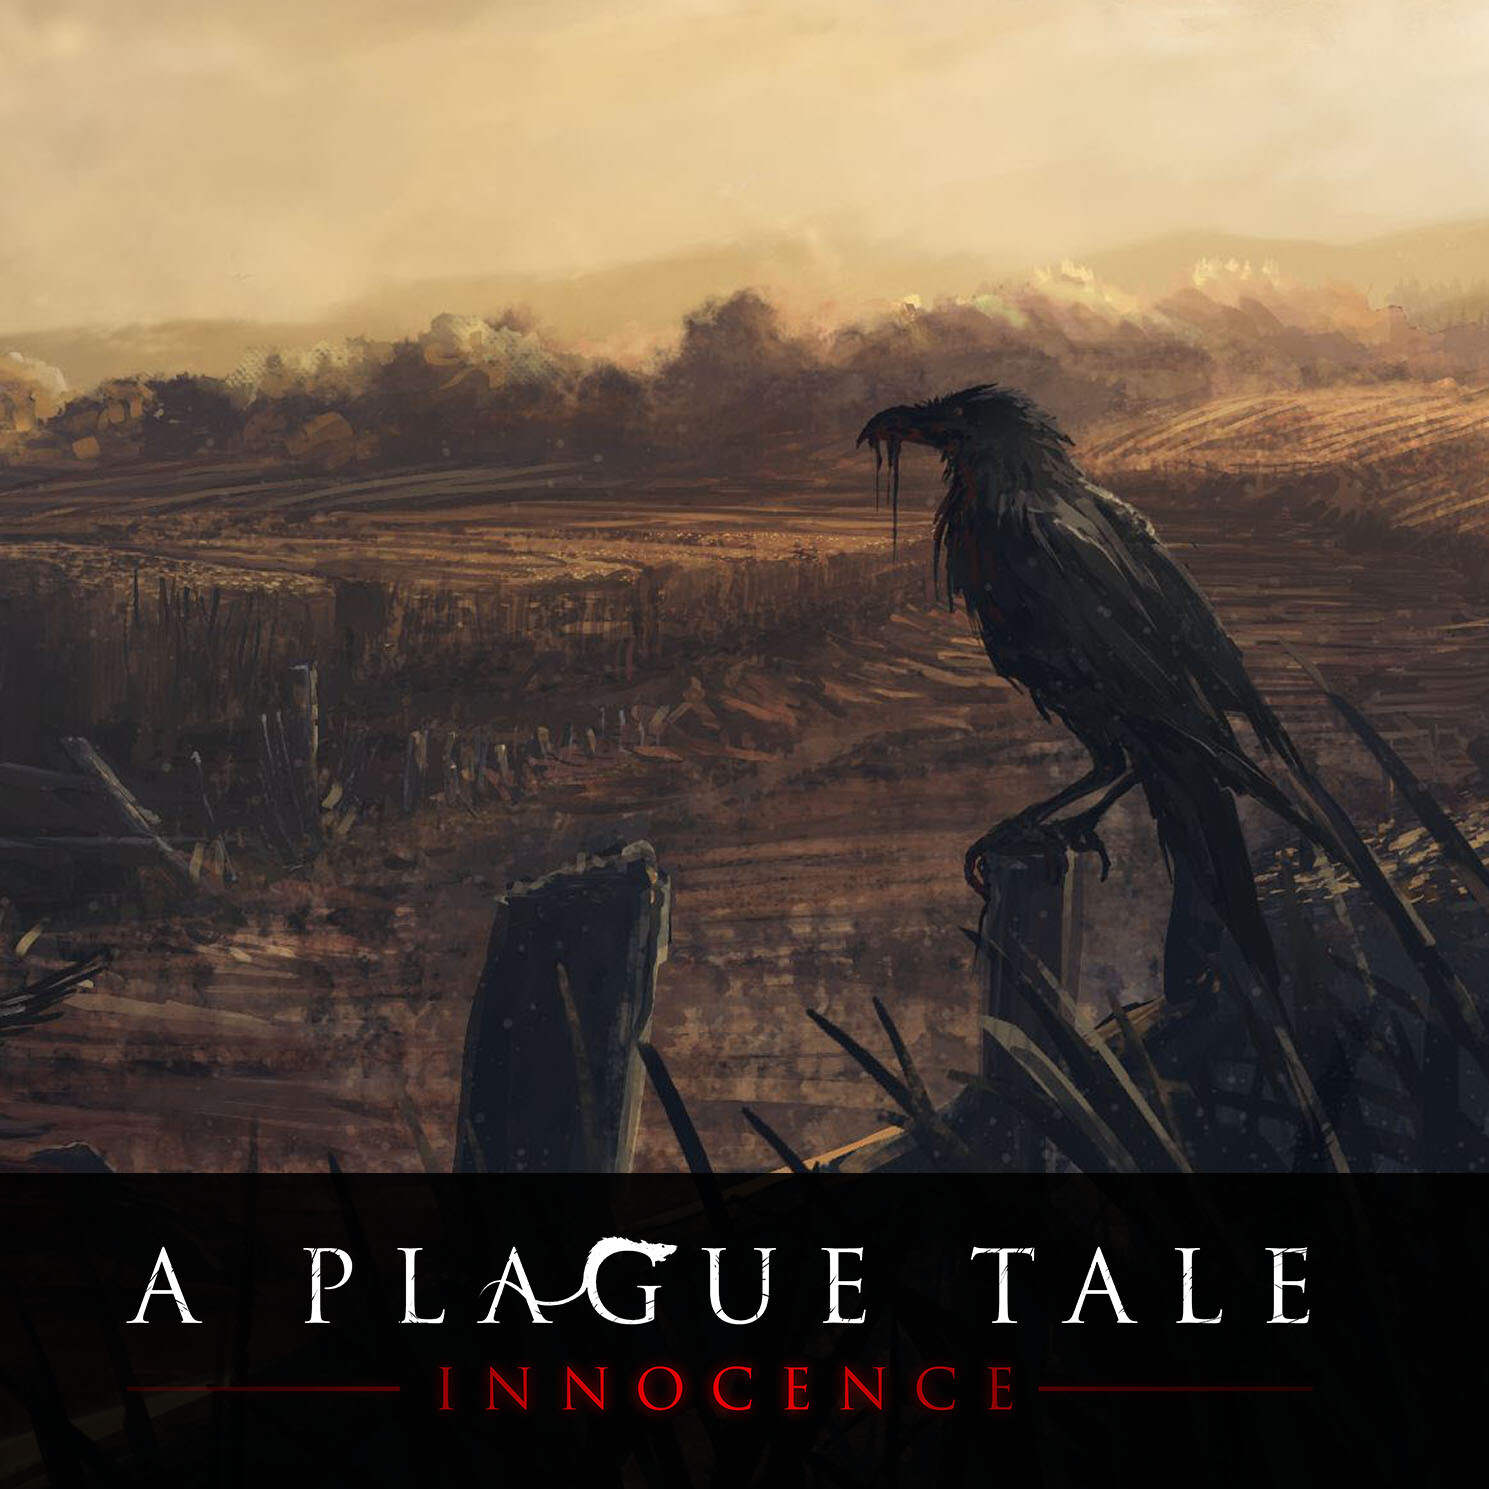 ArtStation - A Plague Tale : Innocence - The Way of Roses, Olivier Cannone